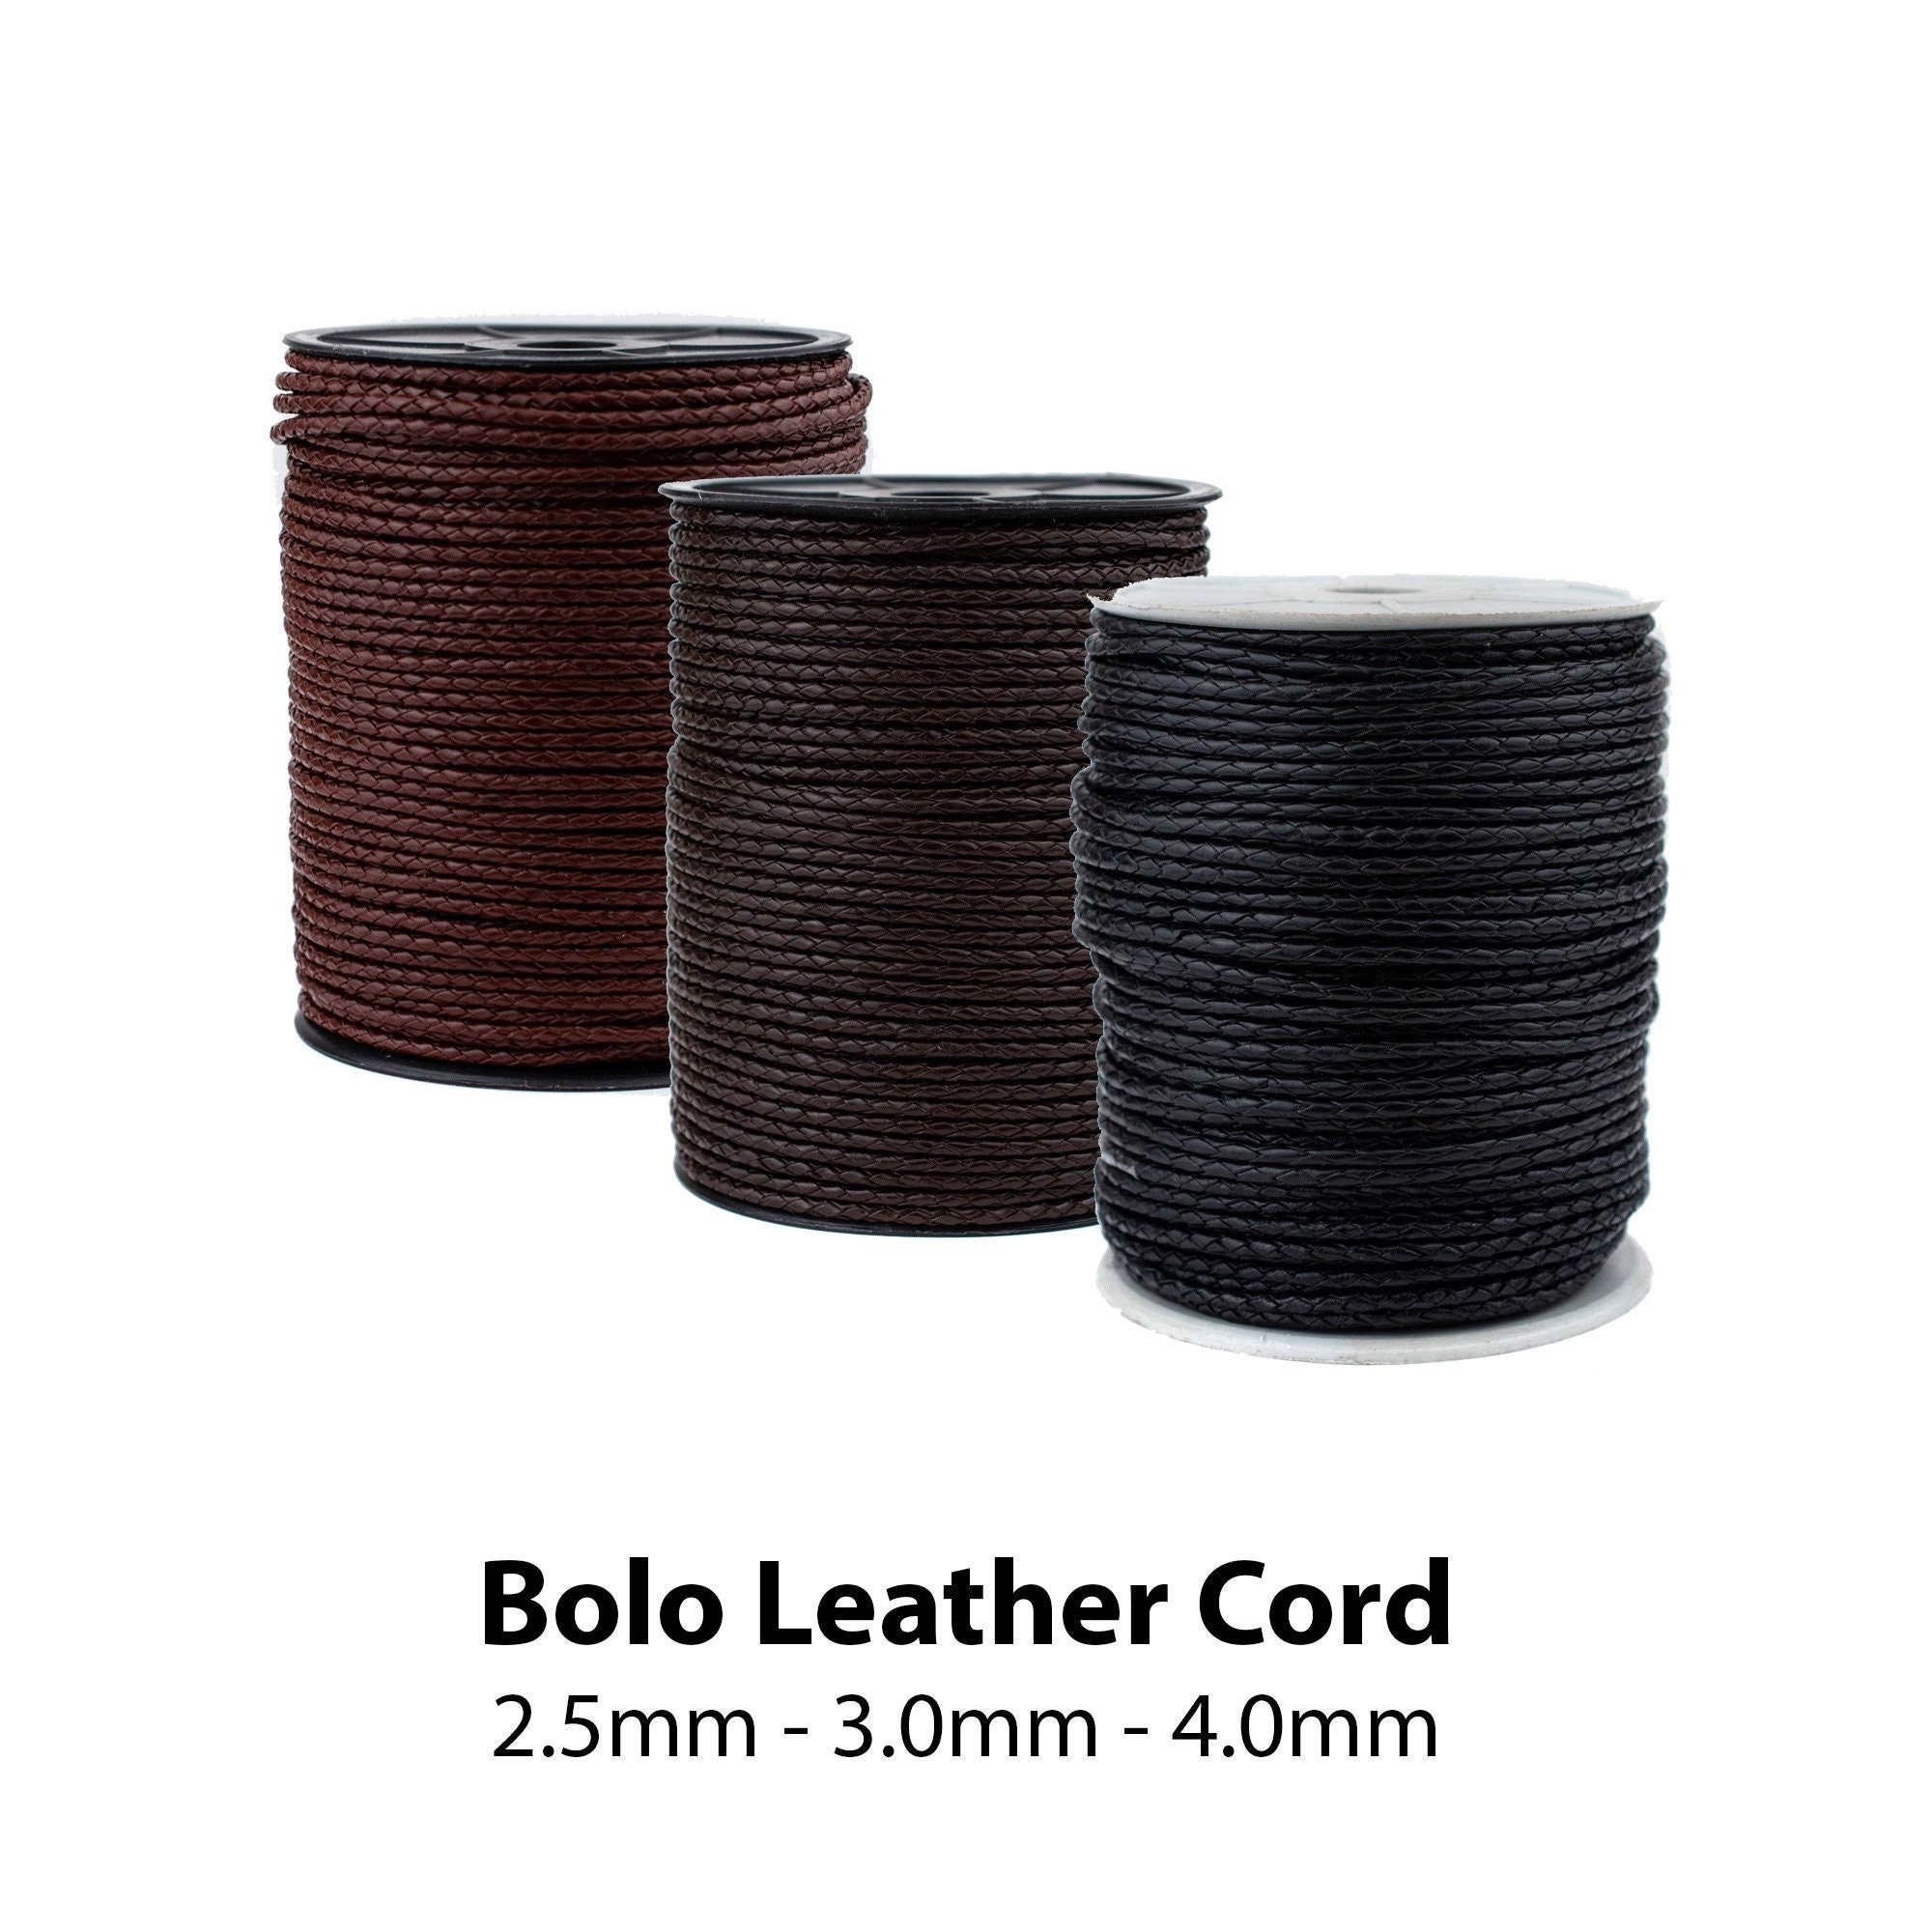 Mandala Crafts 6mm Bolo Cord Bolo Braided Leather Cord for Jewelry Making Round Genuine Leather Cord Bolo Tie Cord for Crafts Wrapping Bolo Ties Re